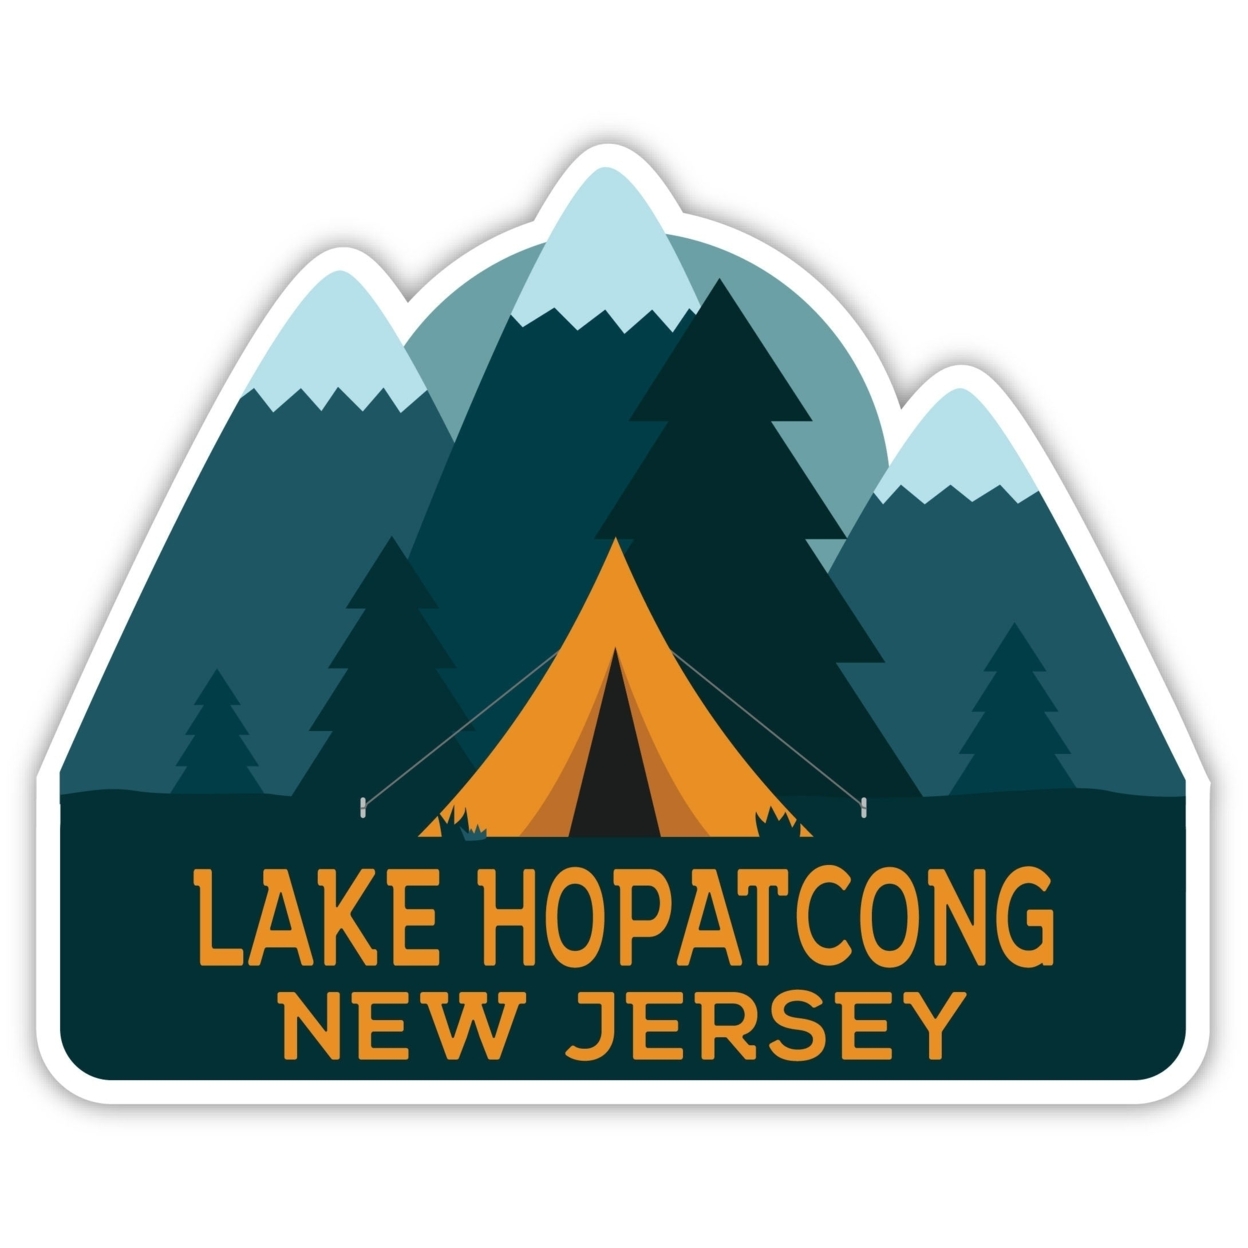 Lake Hopatcong New Jersey Souvenir Decorative Stickers (Choose Theme And Size) - 4-Inch, Tent